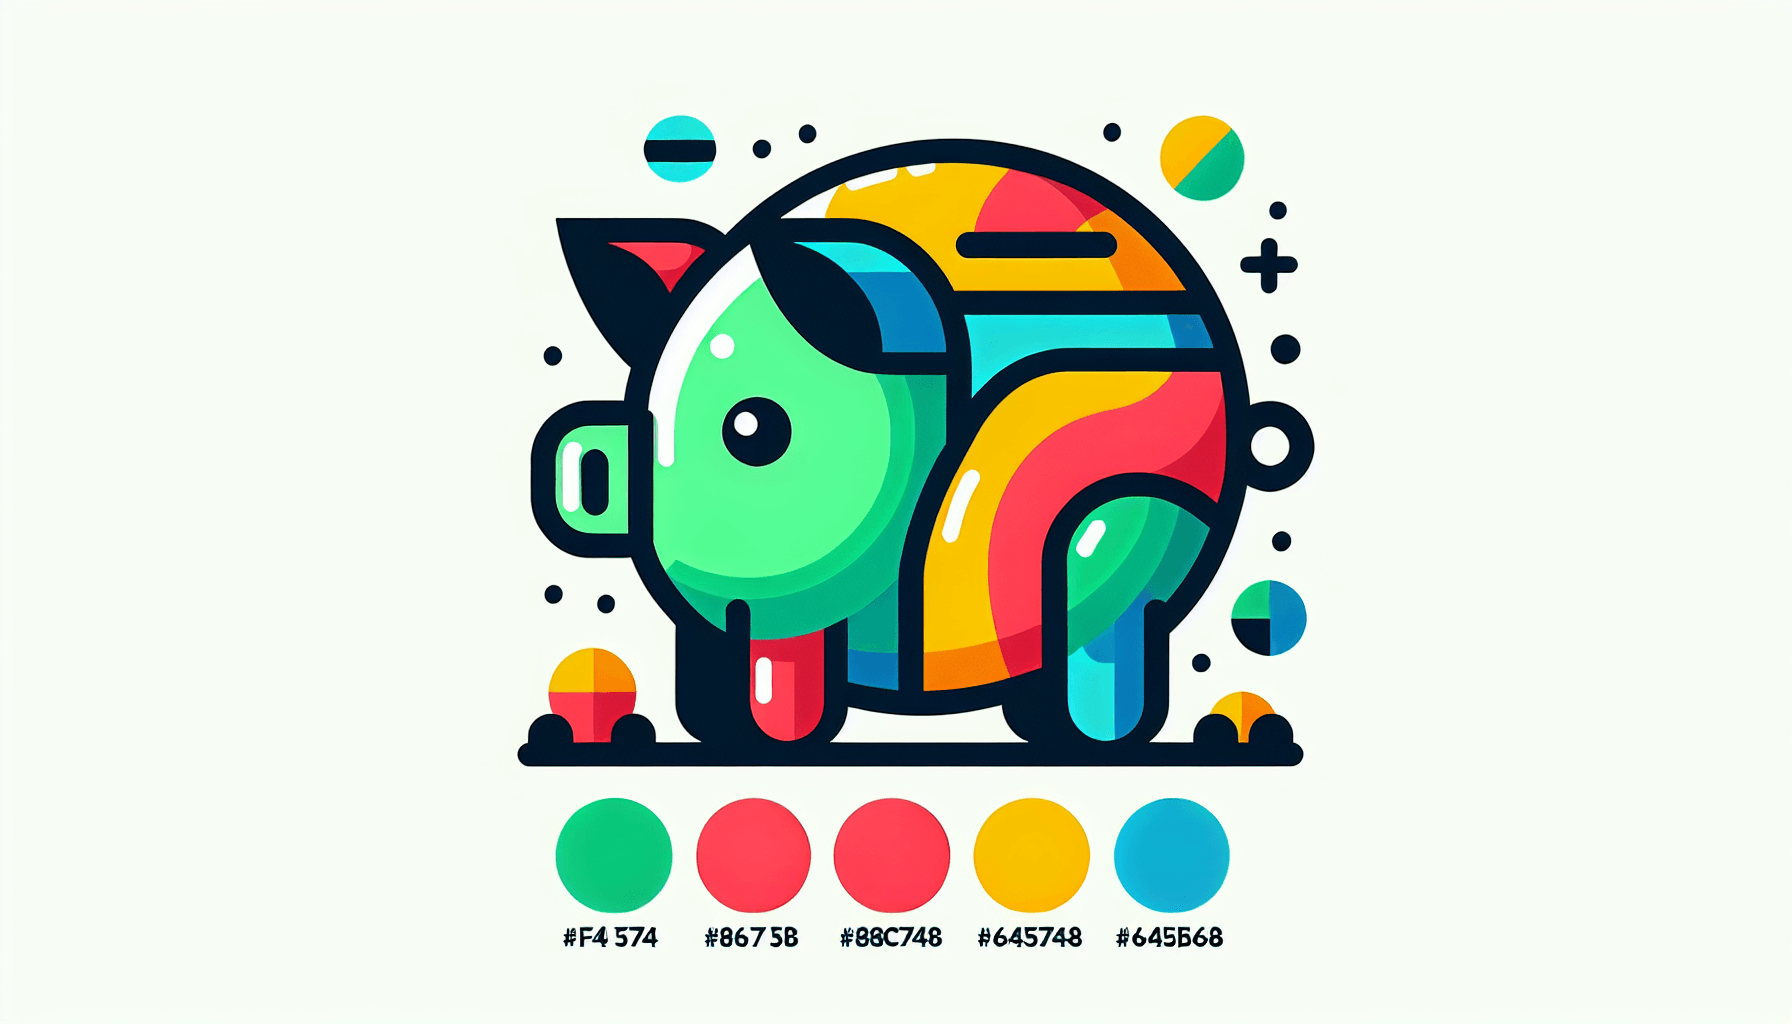 Piggy bank in flat illustration style and white background, red #f47574, green #88c7a8, yellow #fcc44b, and blue #645bc8 colors.